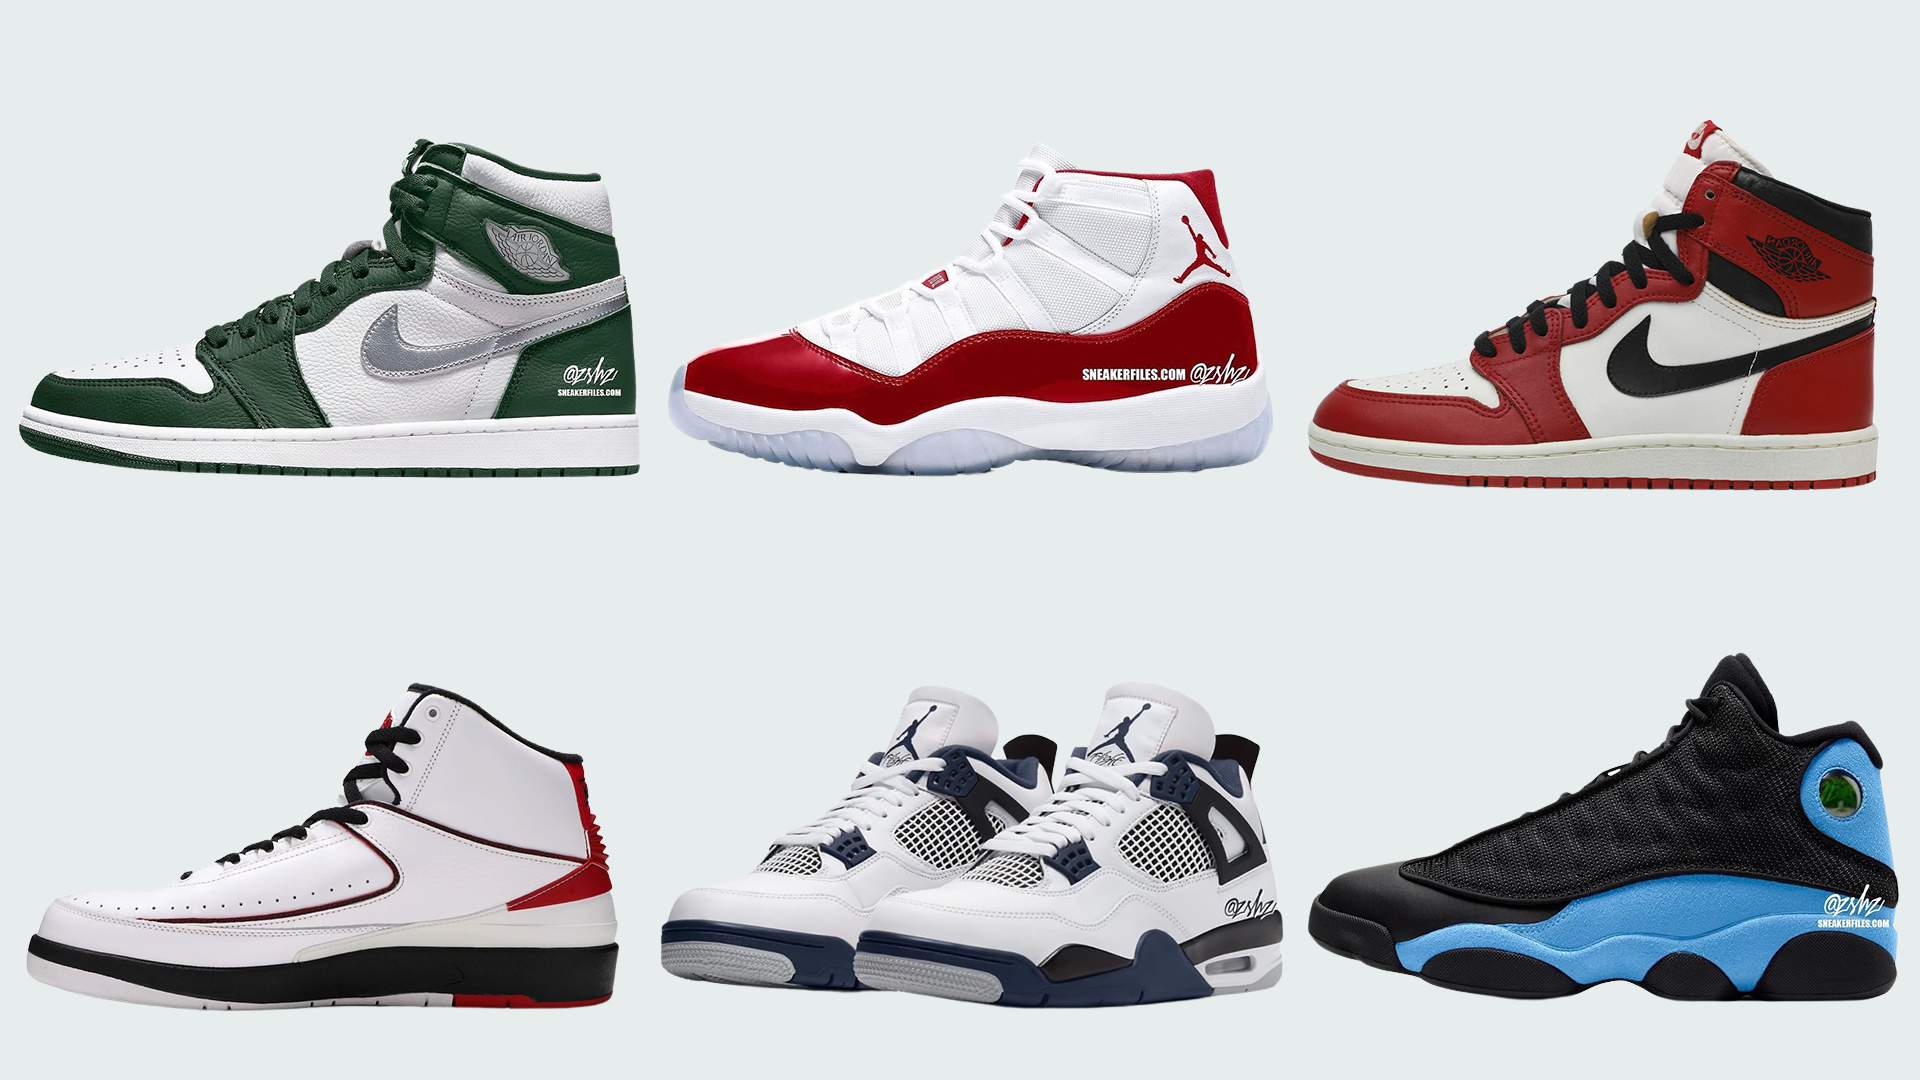 Take an Early Look at Jordan Brand's 2022 Winter Line Up | The Sole ...